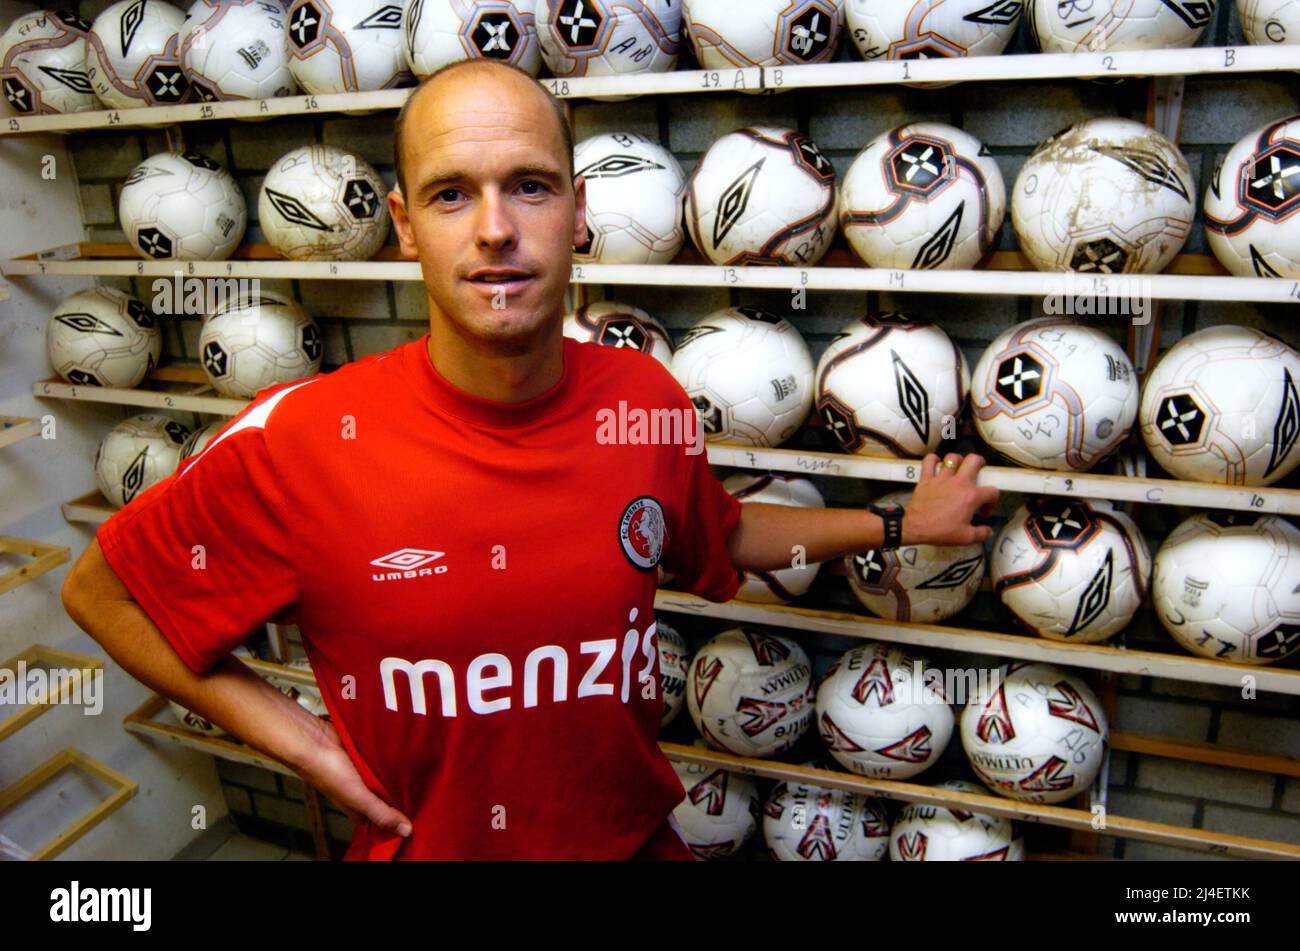 ENSCHEDE, THE NETHERLANDS - SEPT 09, 2005: Soccer coach Erik ten Hag in 2005 when he was head of training at his former club FC Twente. In 2022 he bec Stock Photo